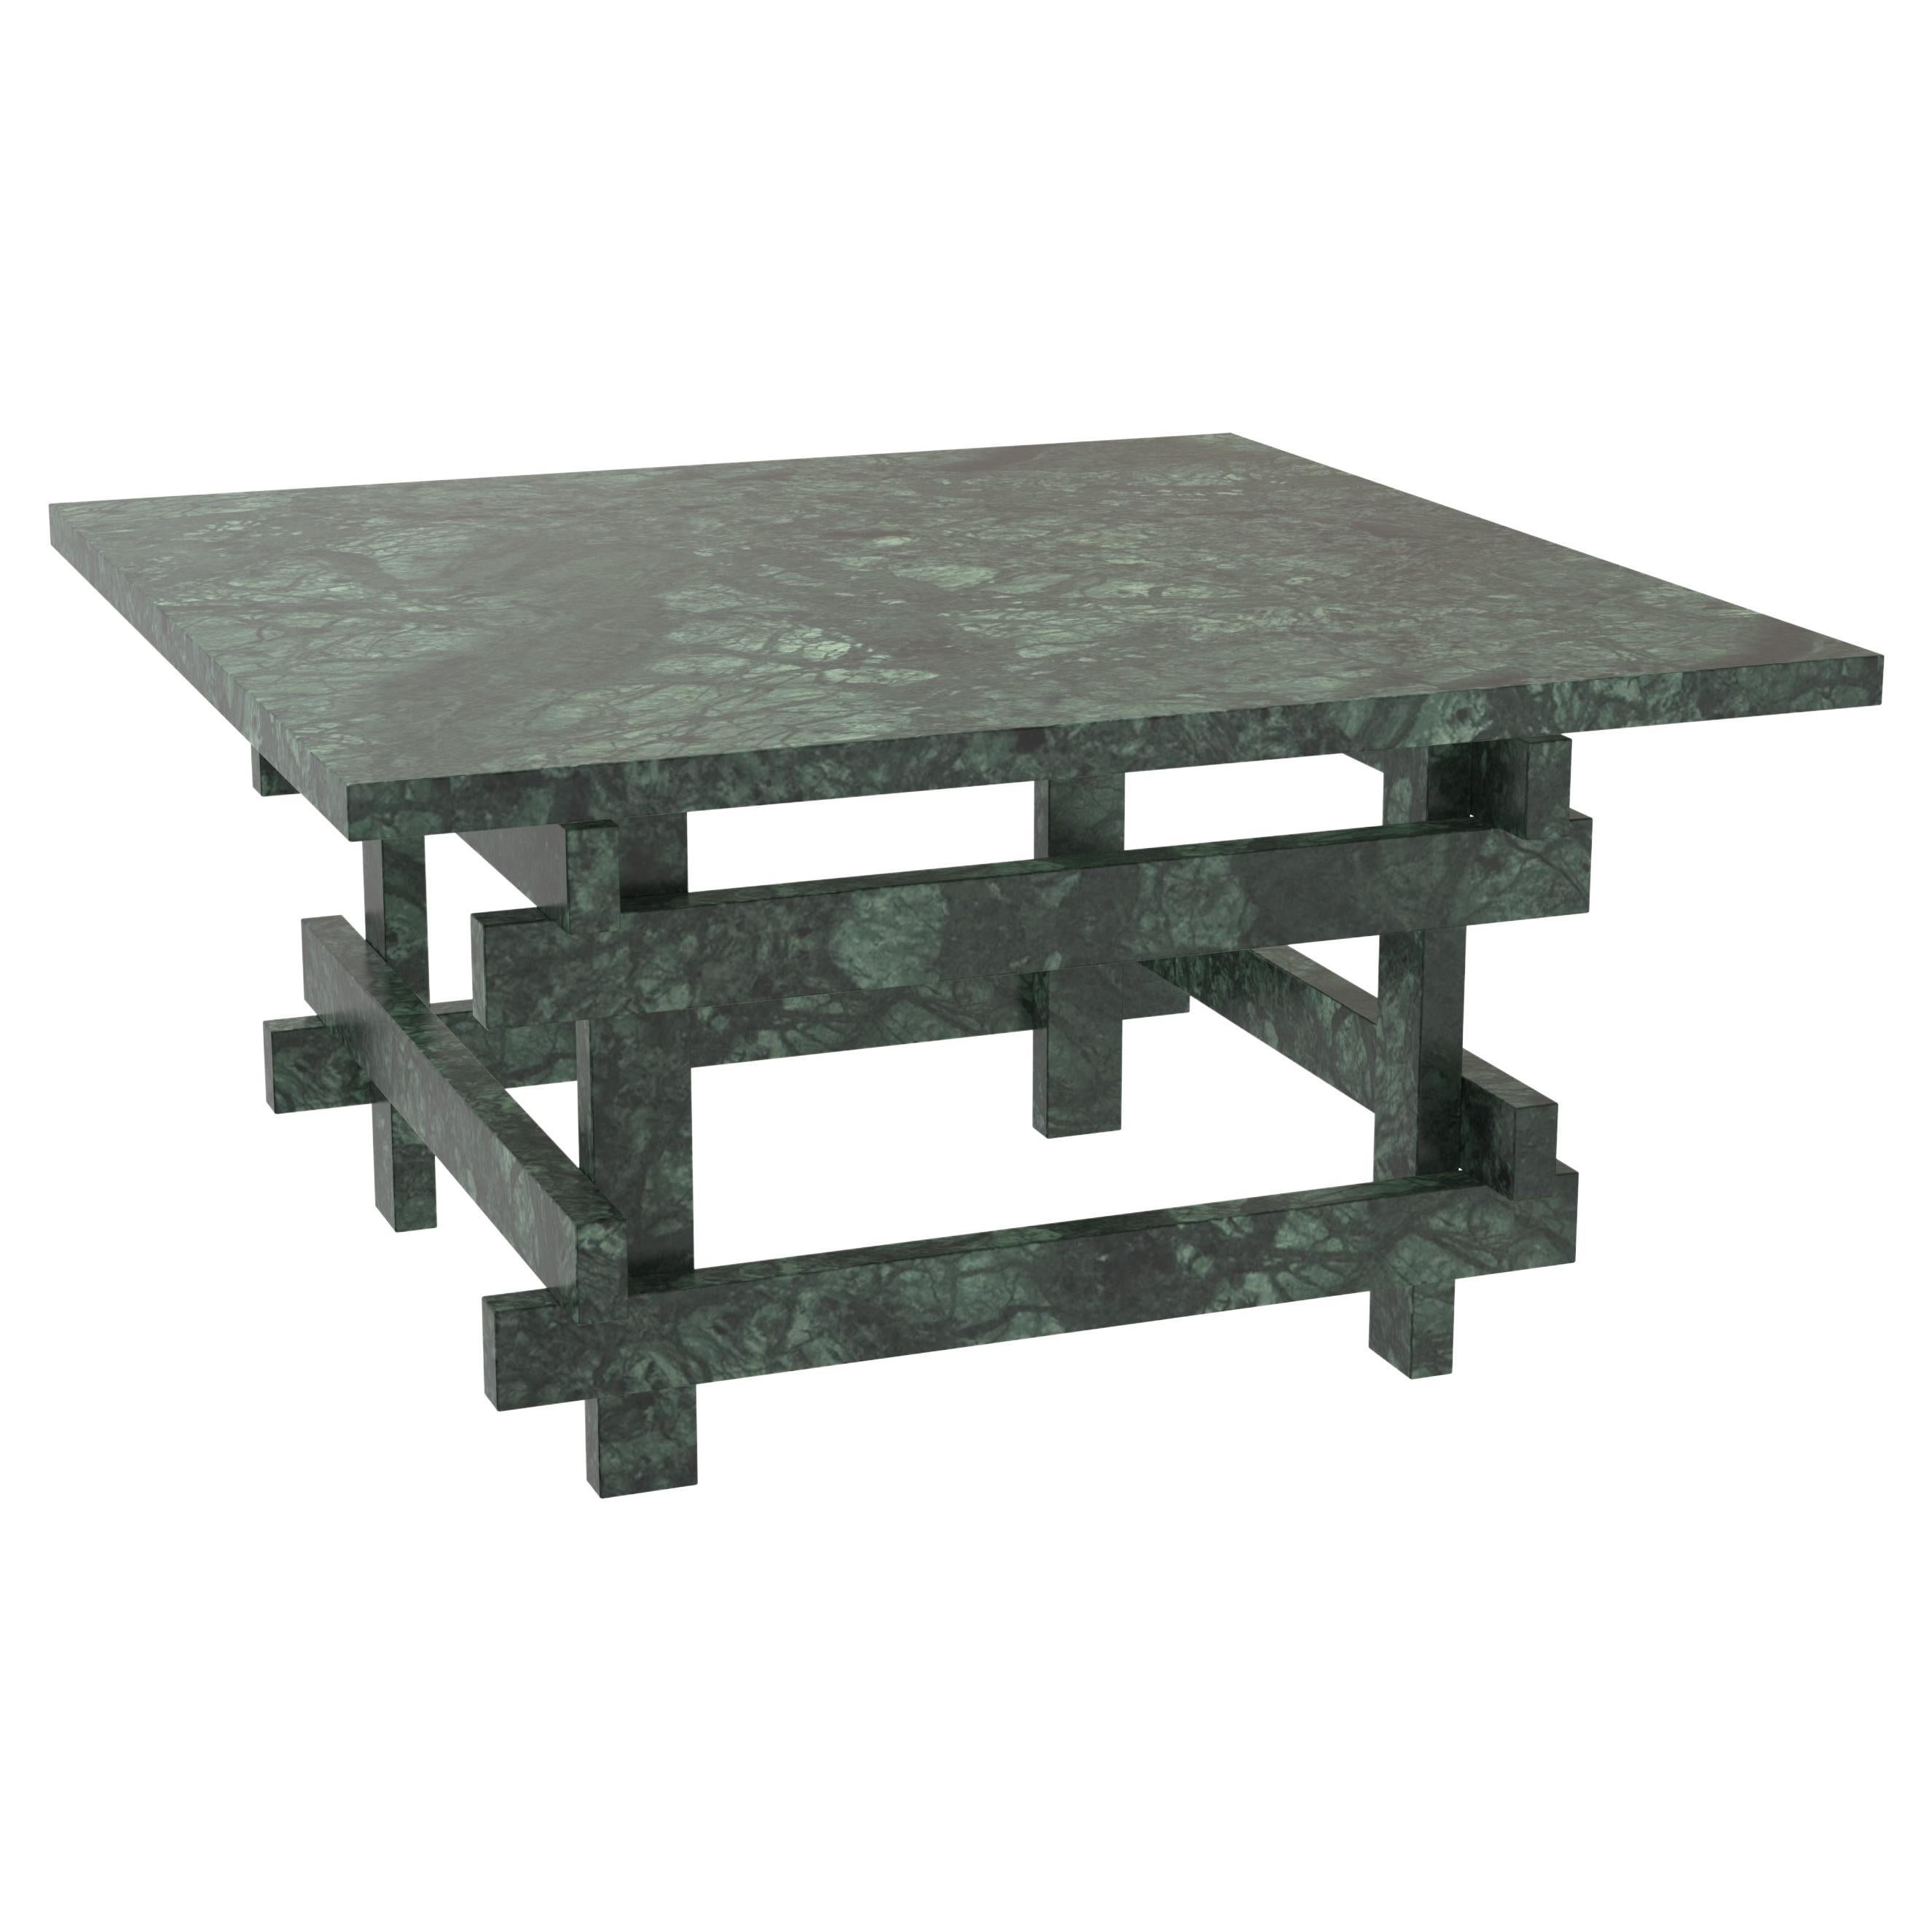 Contemporary Limited Edition Marble Table, Paranoid V2 by Edizione Limitata For Sale